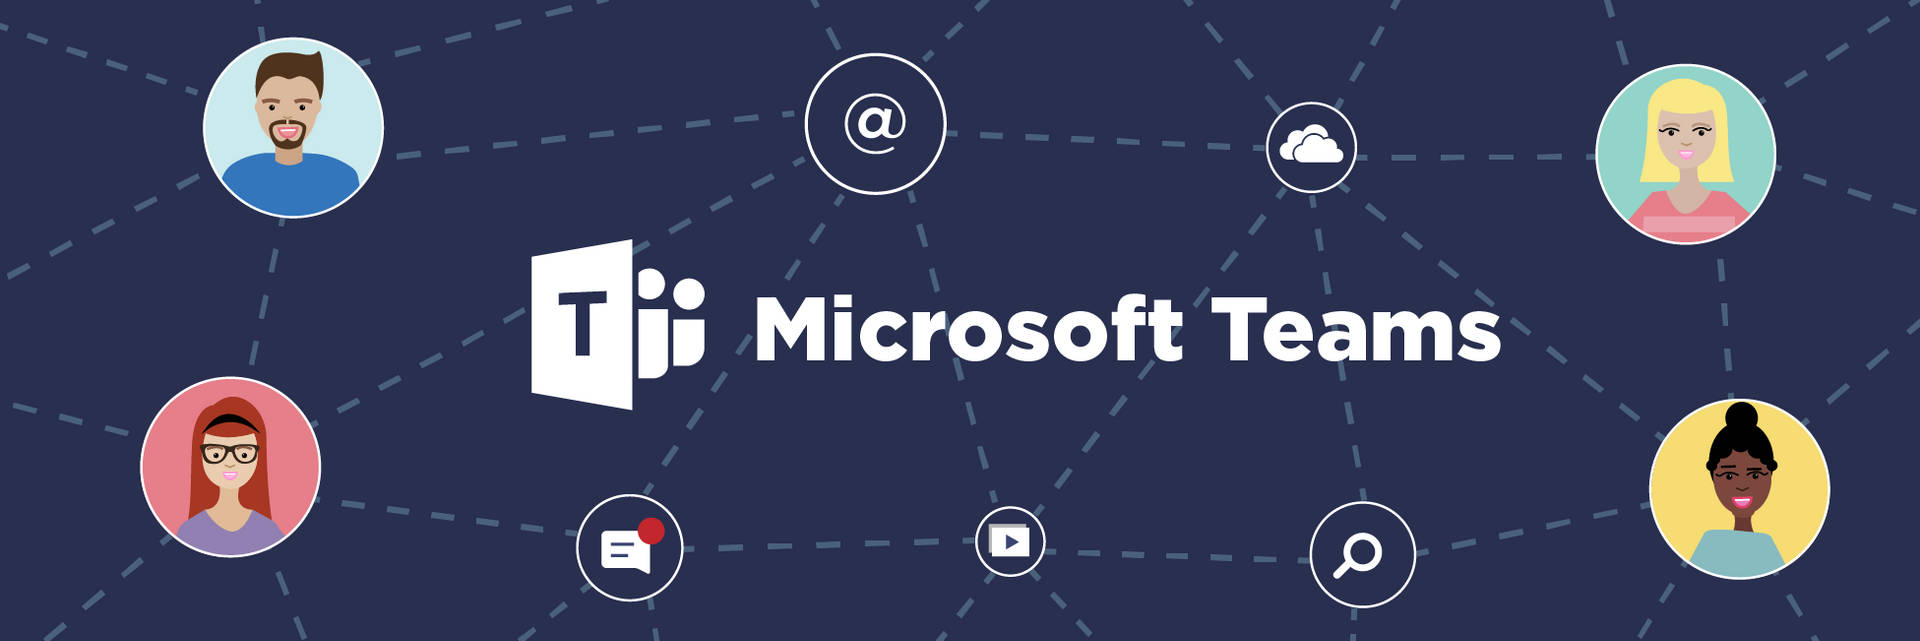 Microsoft Teams Banner Widescreen Picture